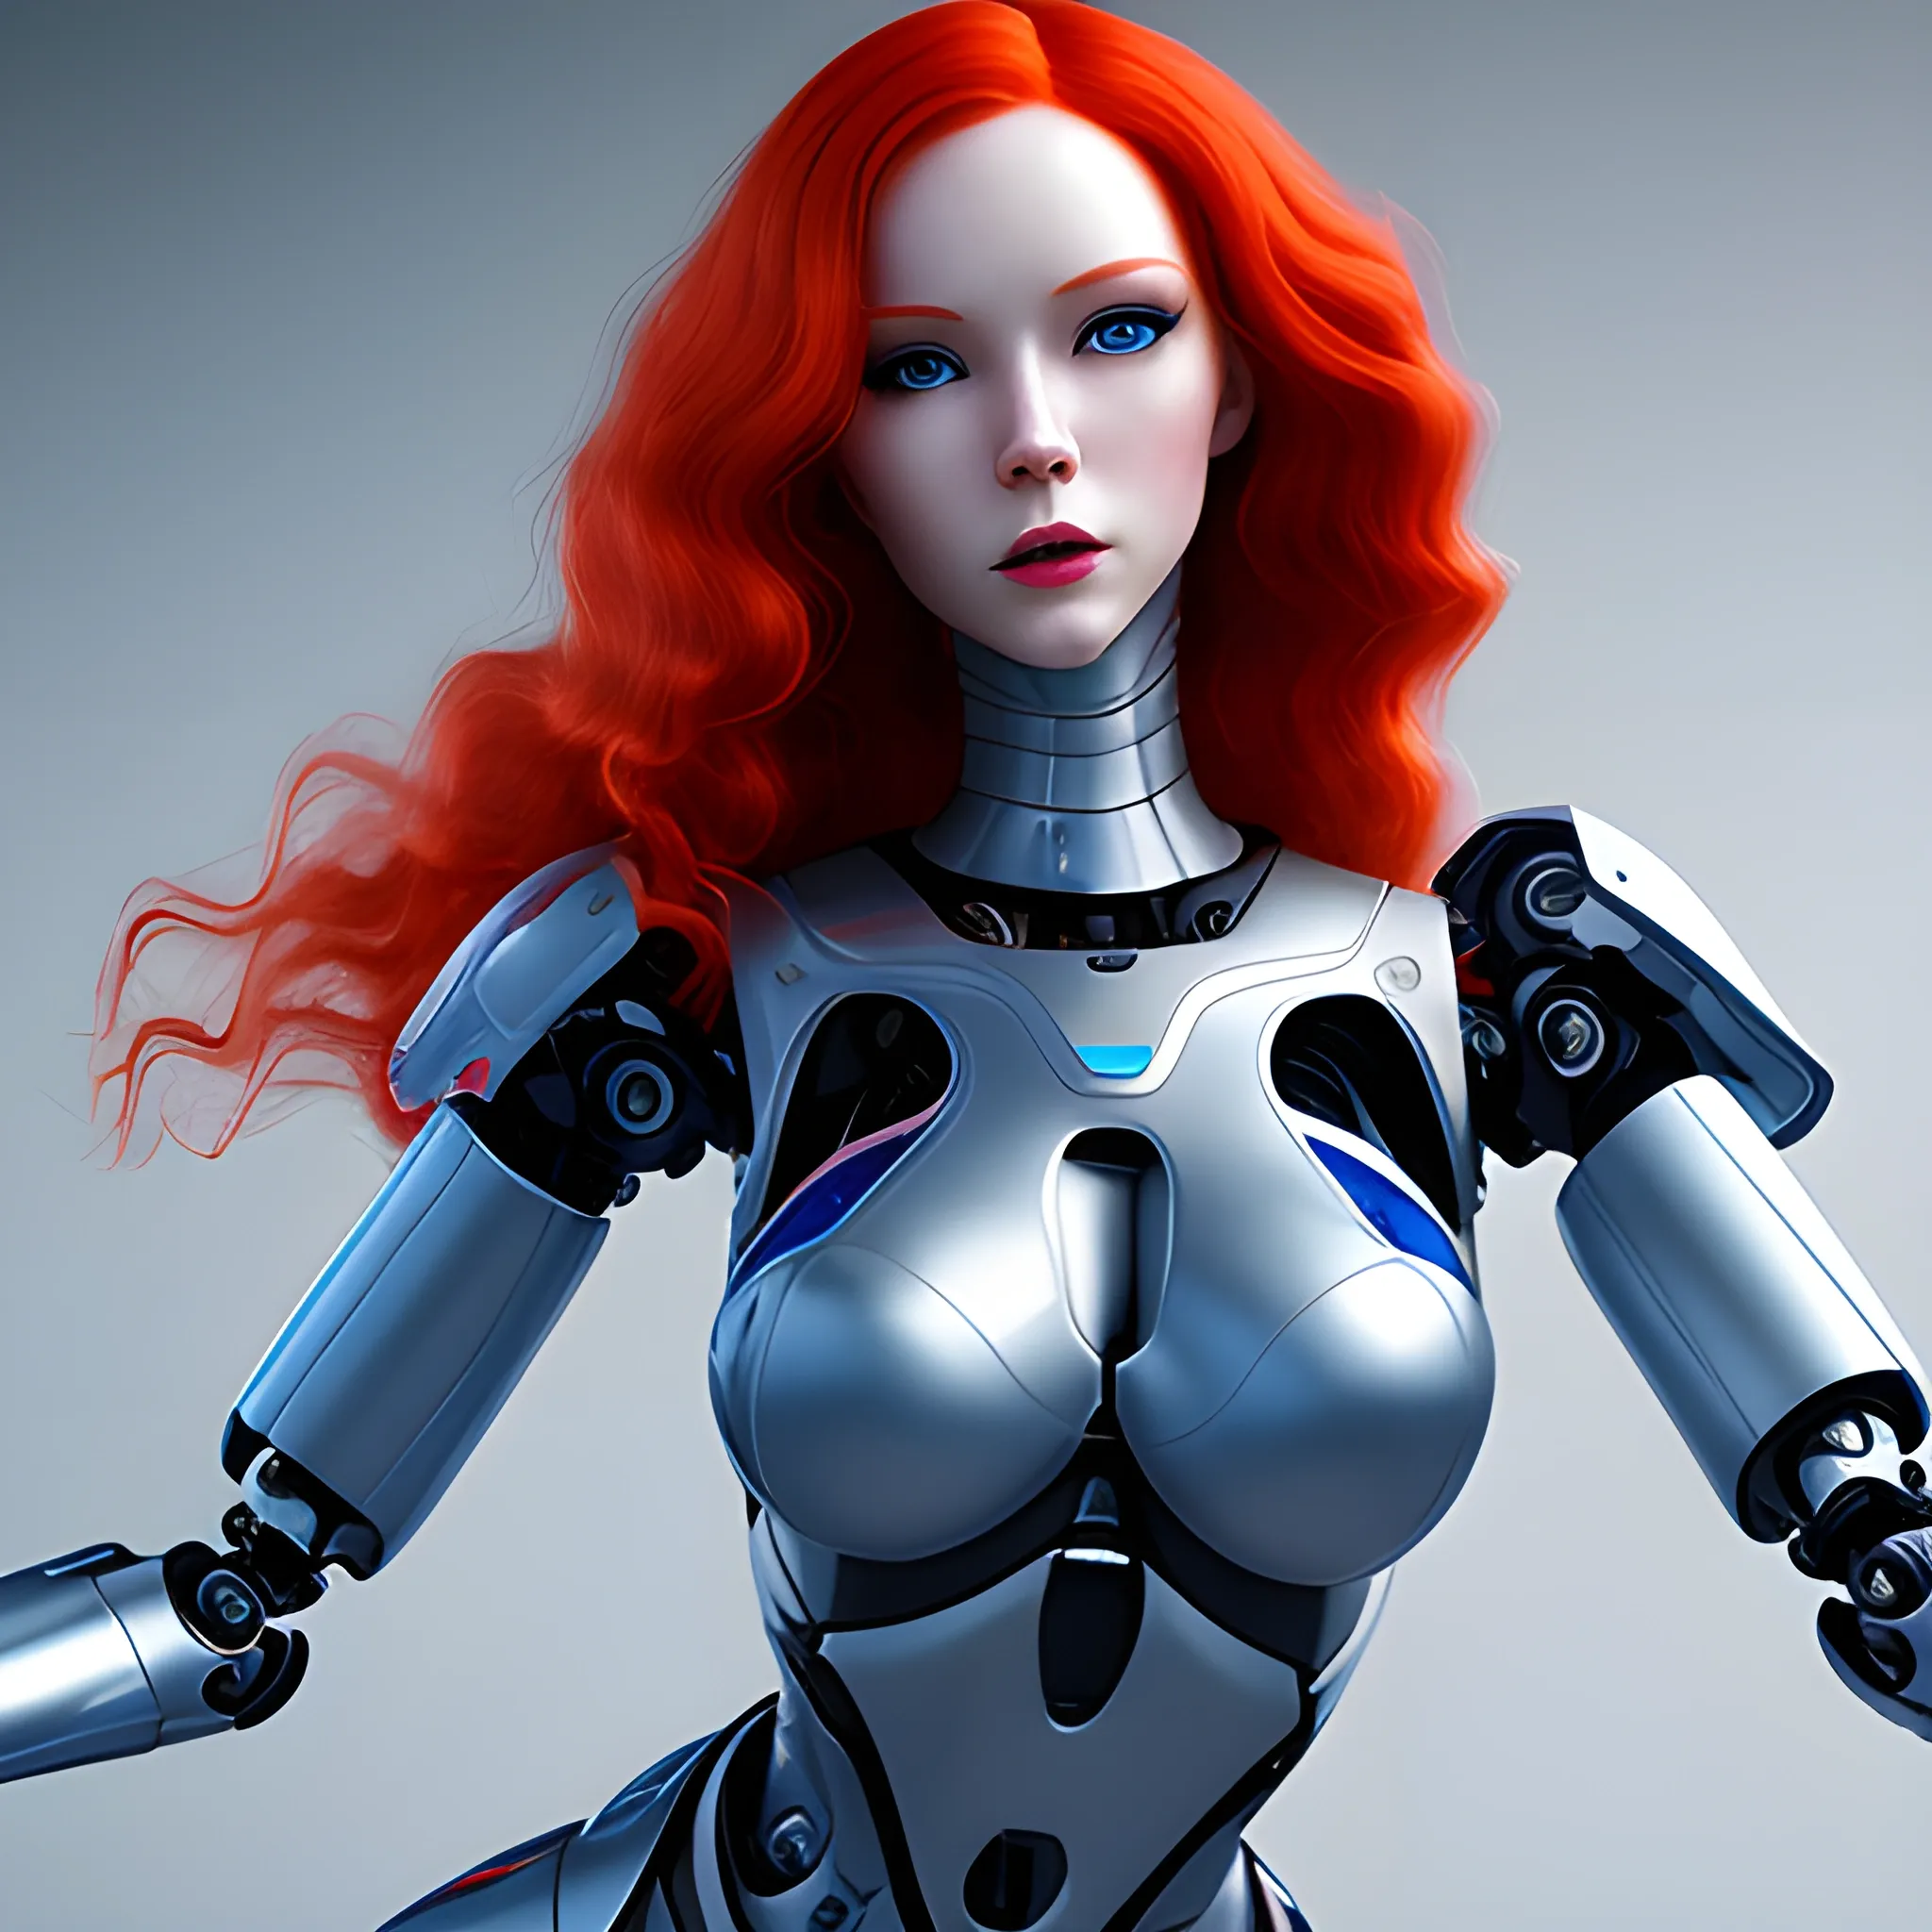 a human type female robot with sexy wardrobe, human face, long red hair, blue eyes, full body escene, battling pose, photorealistic finished
